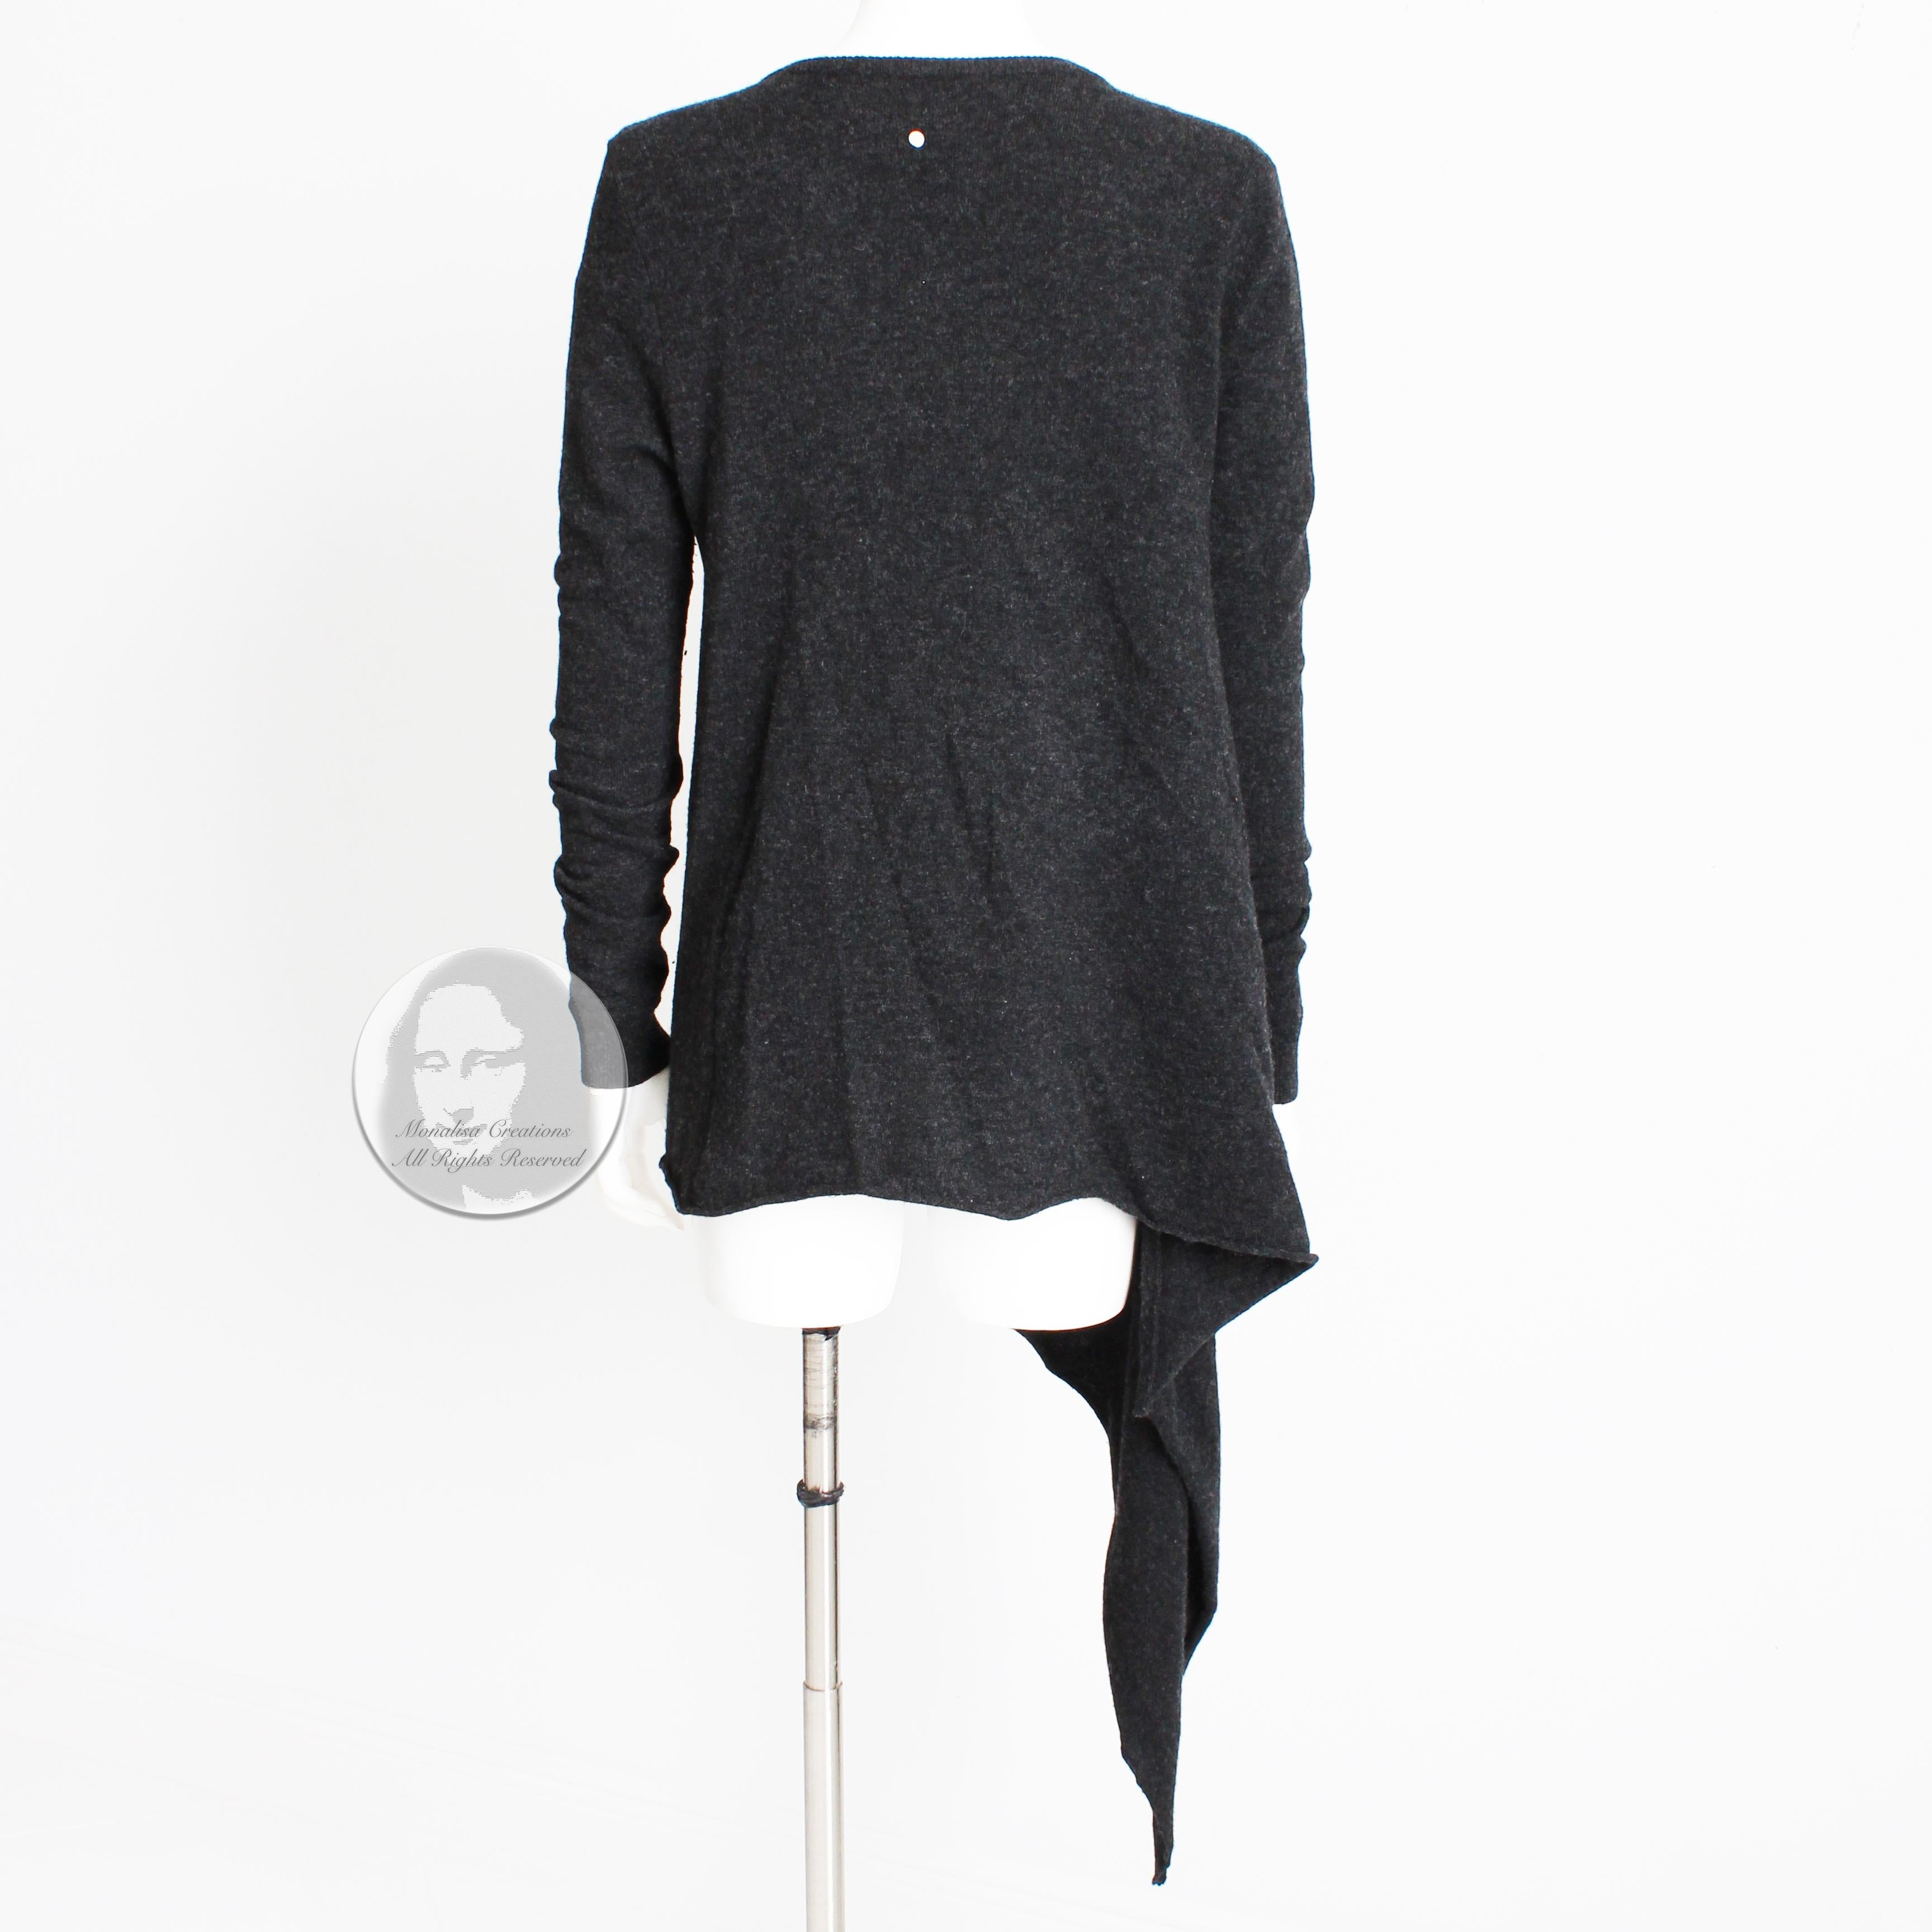 Ann-Sofie Back Sweater Asymmetric Pullover Charcoal Wool Lagenlook 2009 Size L 2